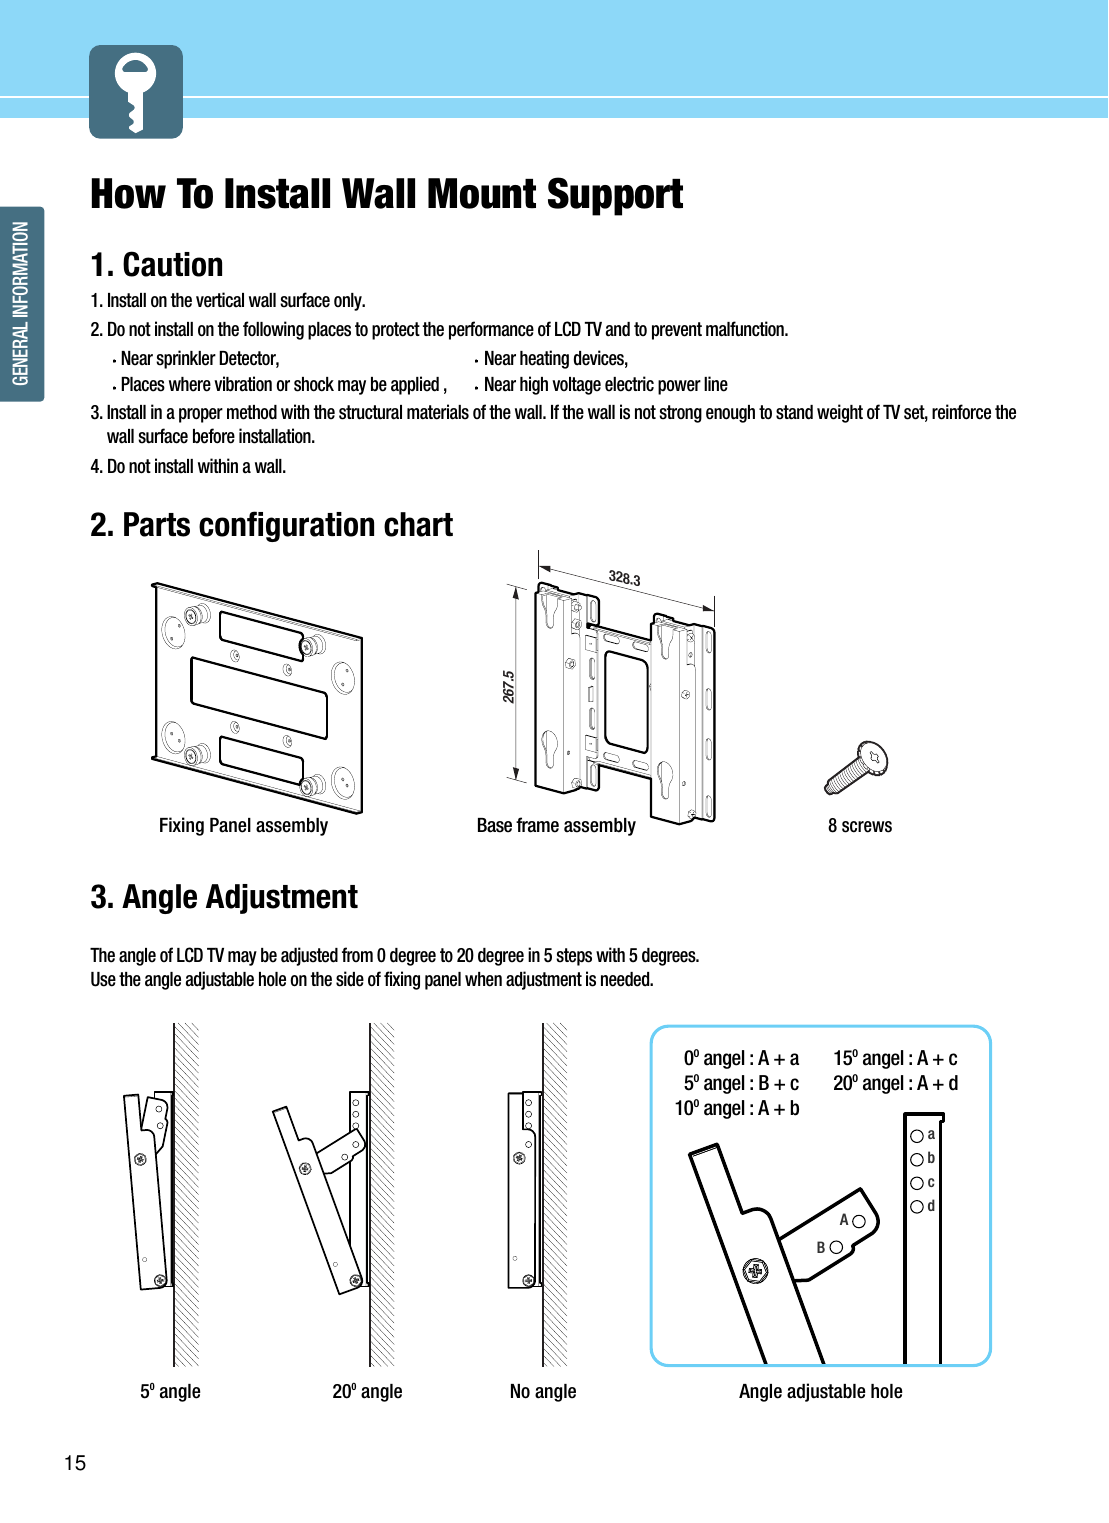 15GENERAL INFORMATIONHow To Install Wall Mount Support1. Caution1. Install on the vertical wall surface only.2. Do not install on the following places to protect the performance of LCD TV and to prevent malfunction.Near sprinkler Detector, Near heating devices, Places where vibration or shock may be applied , Near high voltage electric power line3. Install in a proper method with the structural materials of the wall. If the wall is not strong enough to stand weight of TV set, reinforce thewall surface before installation.4. Do not install within a wall.2. Parts configuration chart3. Angle AdjustmentThe angle of LCD TV may be adjusted from 0 degree to 20 degree in 5 steps with 5 degrees.  Use the angle adjustable hole on the side of fixing panel when adjustment is needed.50angle 200angle No angle267.5328.3Base frame assembly8 screwsFixing Panel assemblyabcdAngle adjustable hole0Oangel : A + a5Oangel : B + c 10Oangel : A + b15Oangel : A + c20Oangel : A + dAB